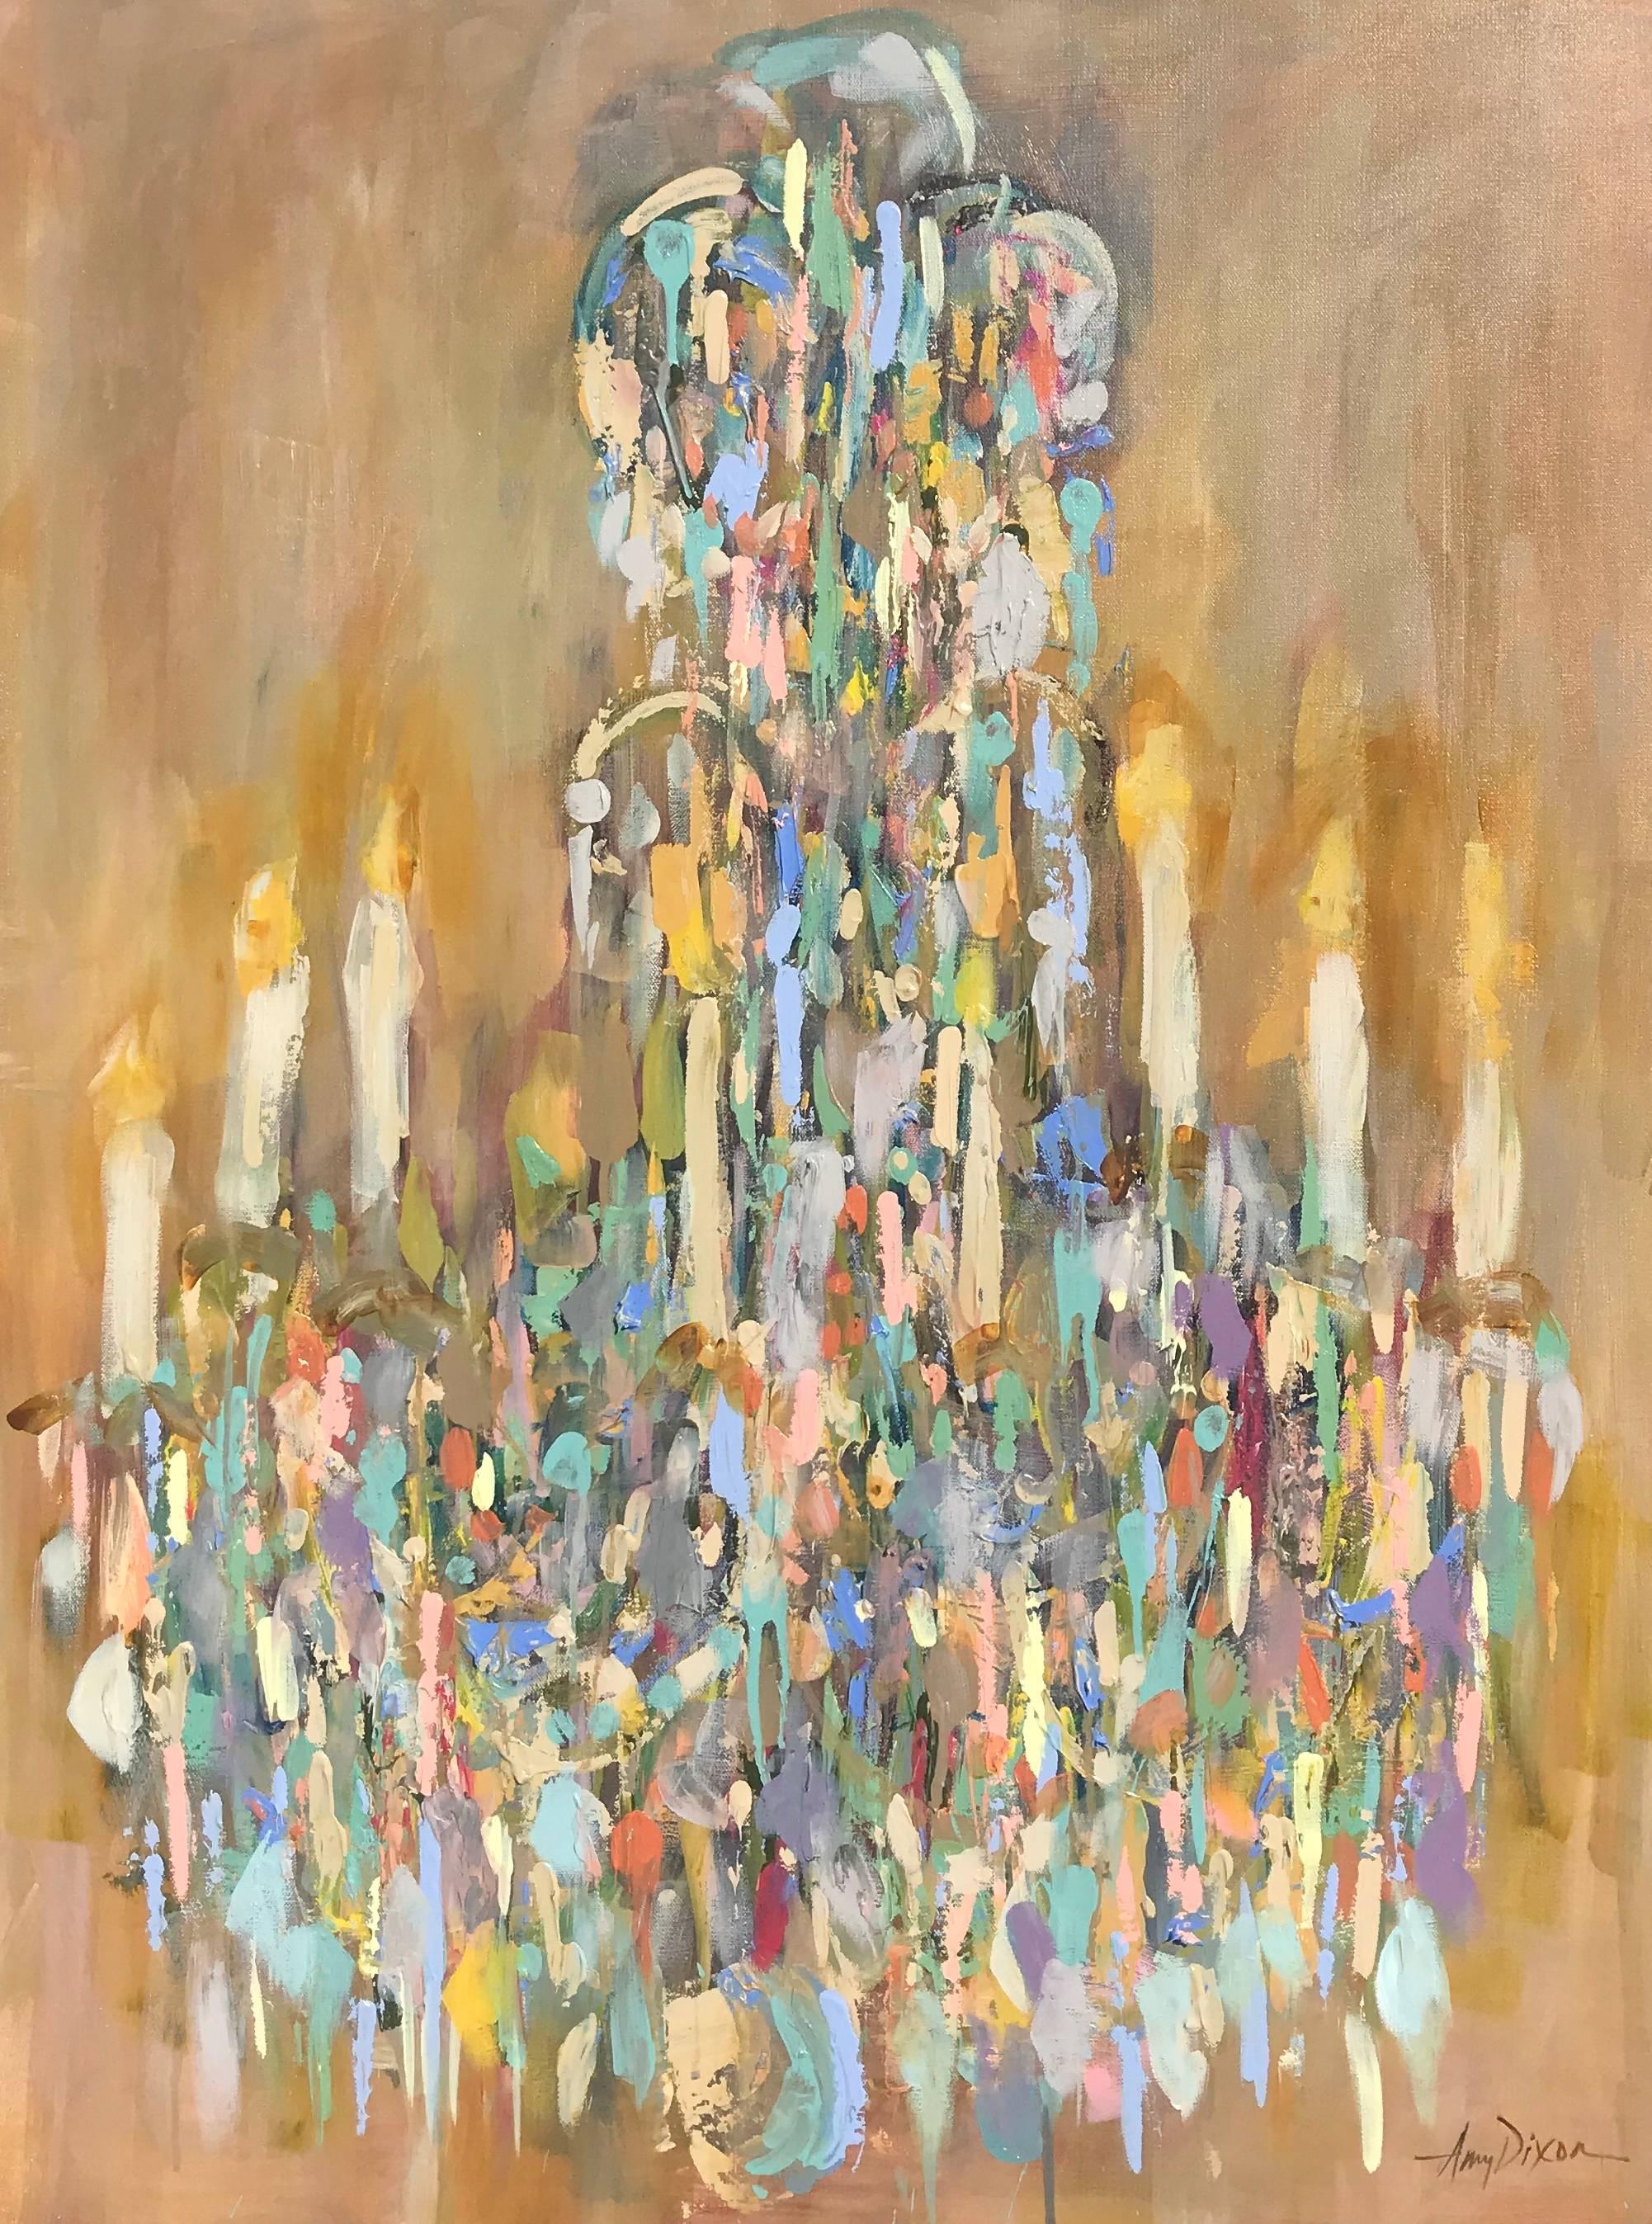 Amy Dixon - Chandelier Degas, Post-Impressionist Vertical Mixed Media on Canvas  Painting For Sale at 1stDibs | chandelier painting